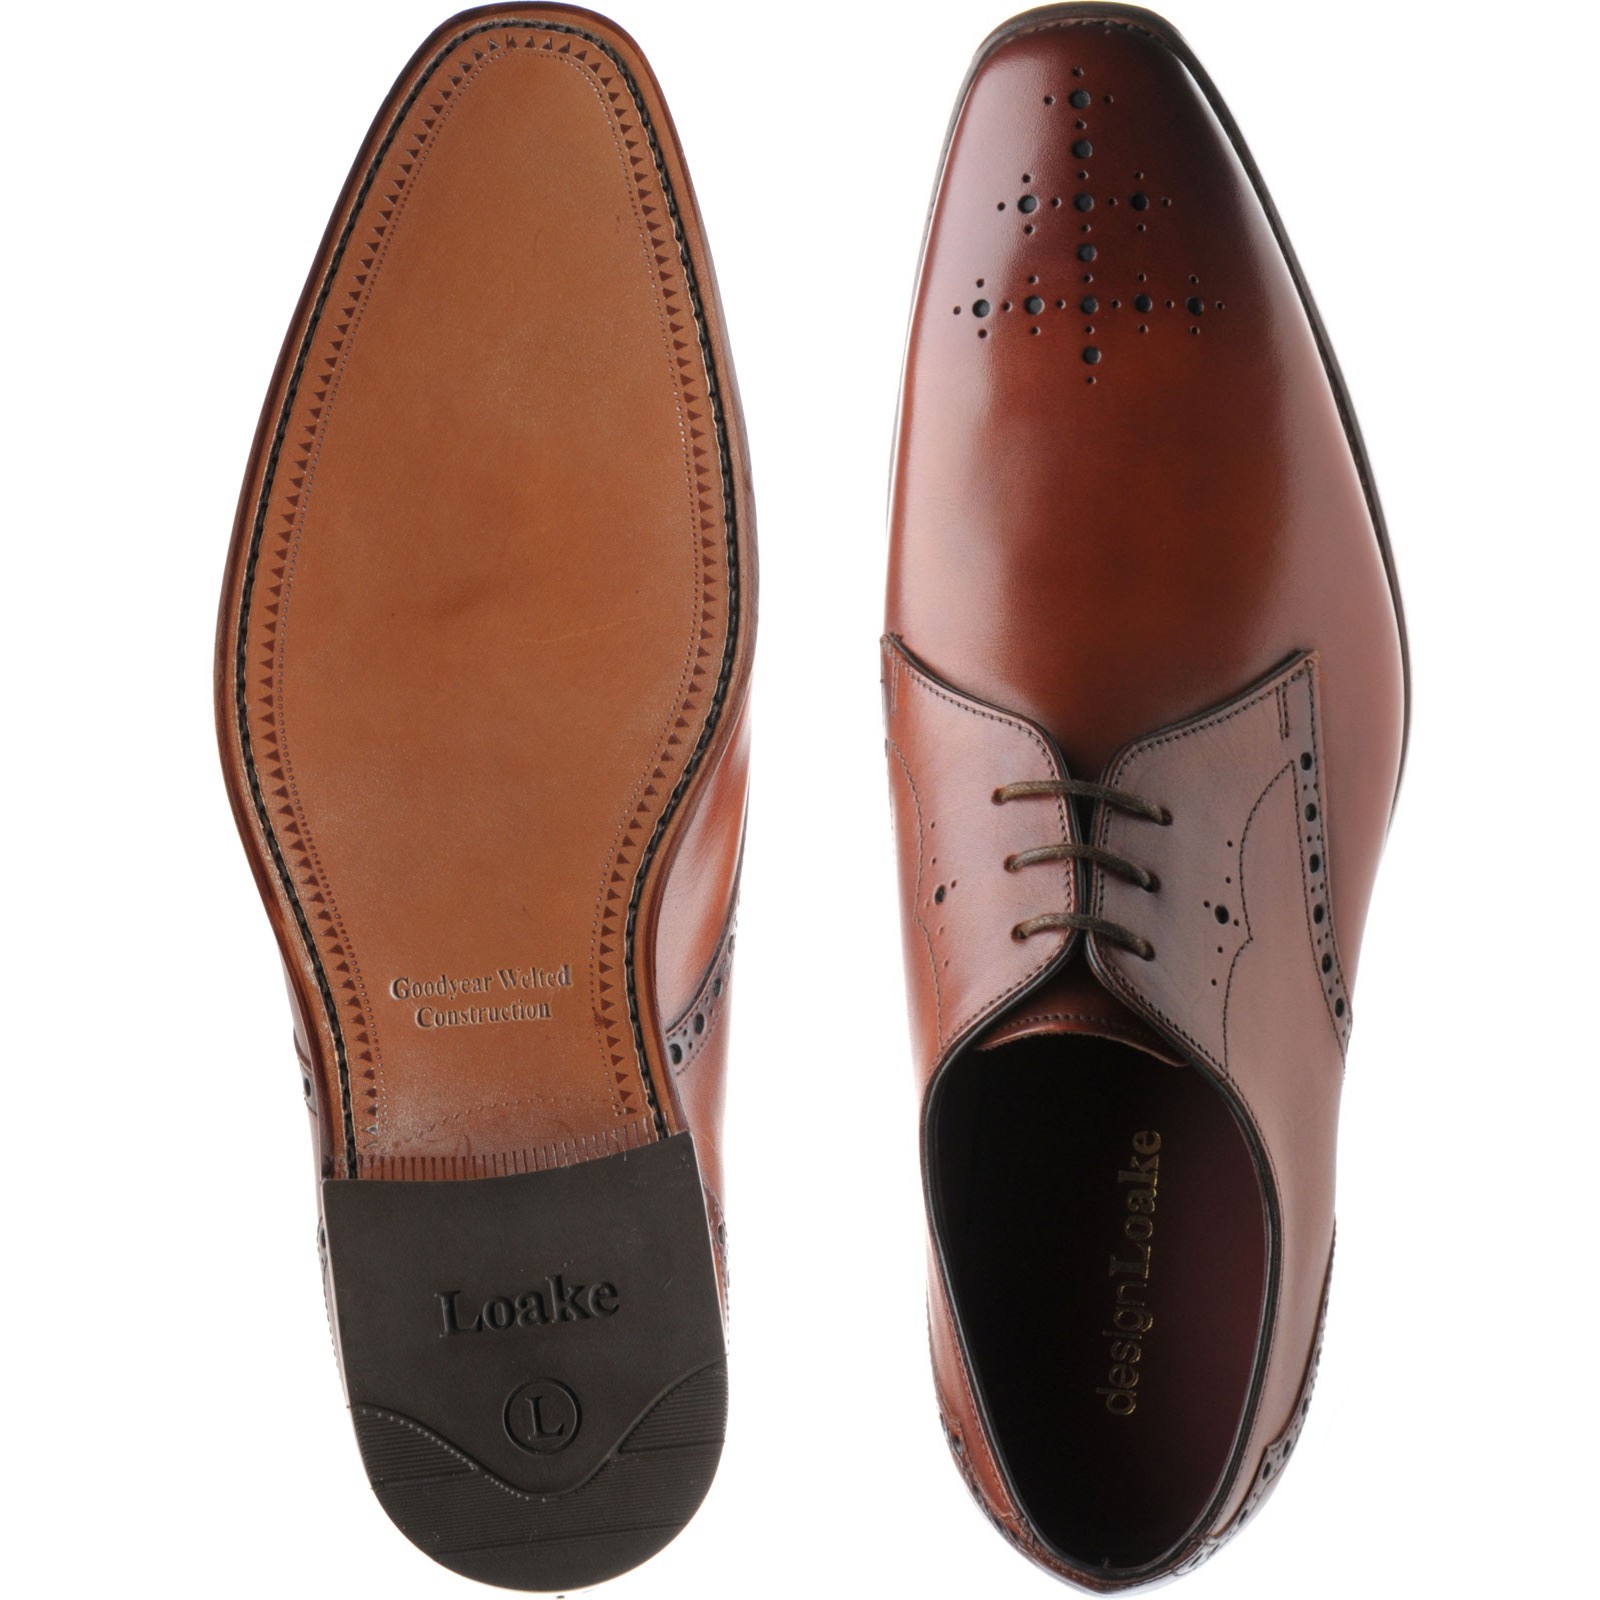 Loake shoes | Loake Design | Hannibal in Handpainted Chestnut Calf at ...